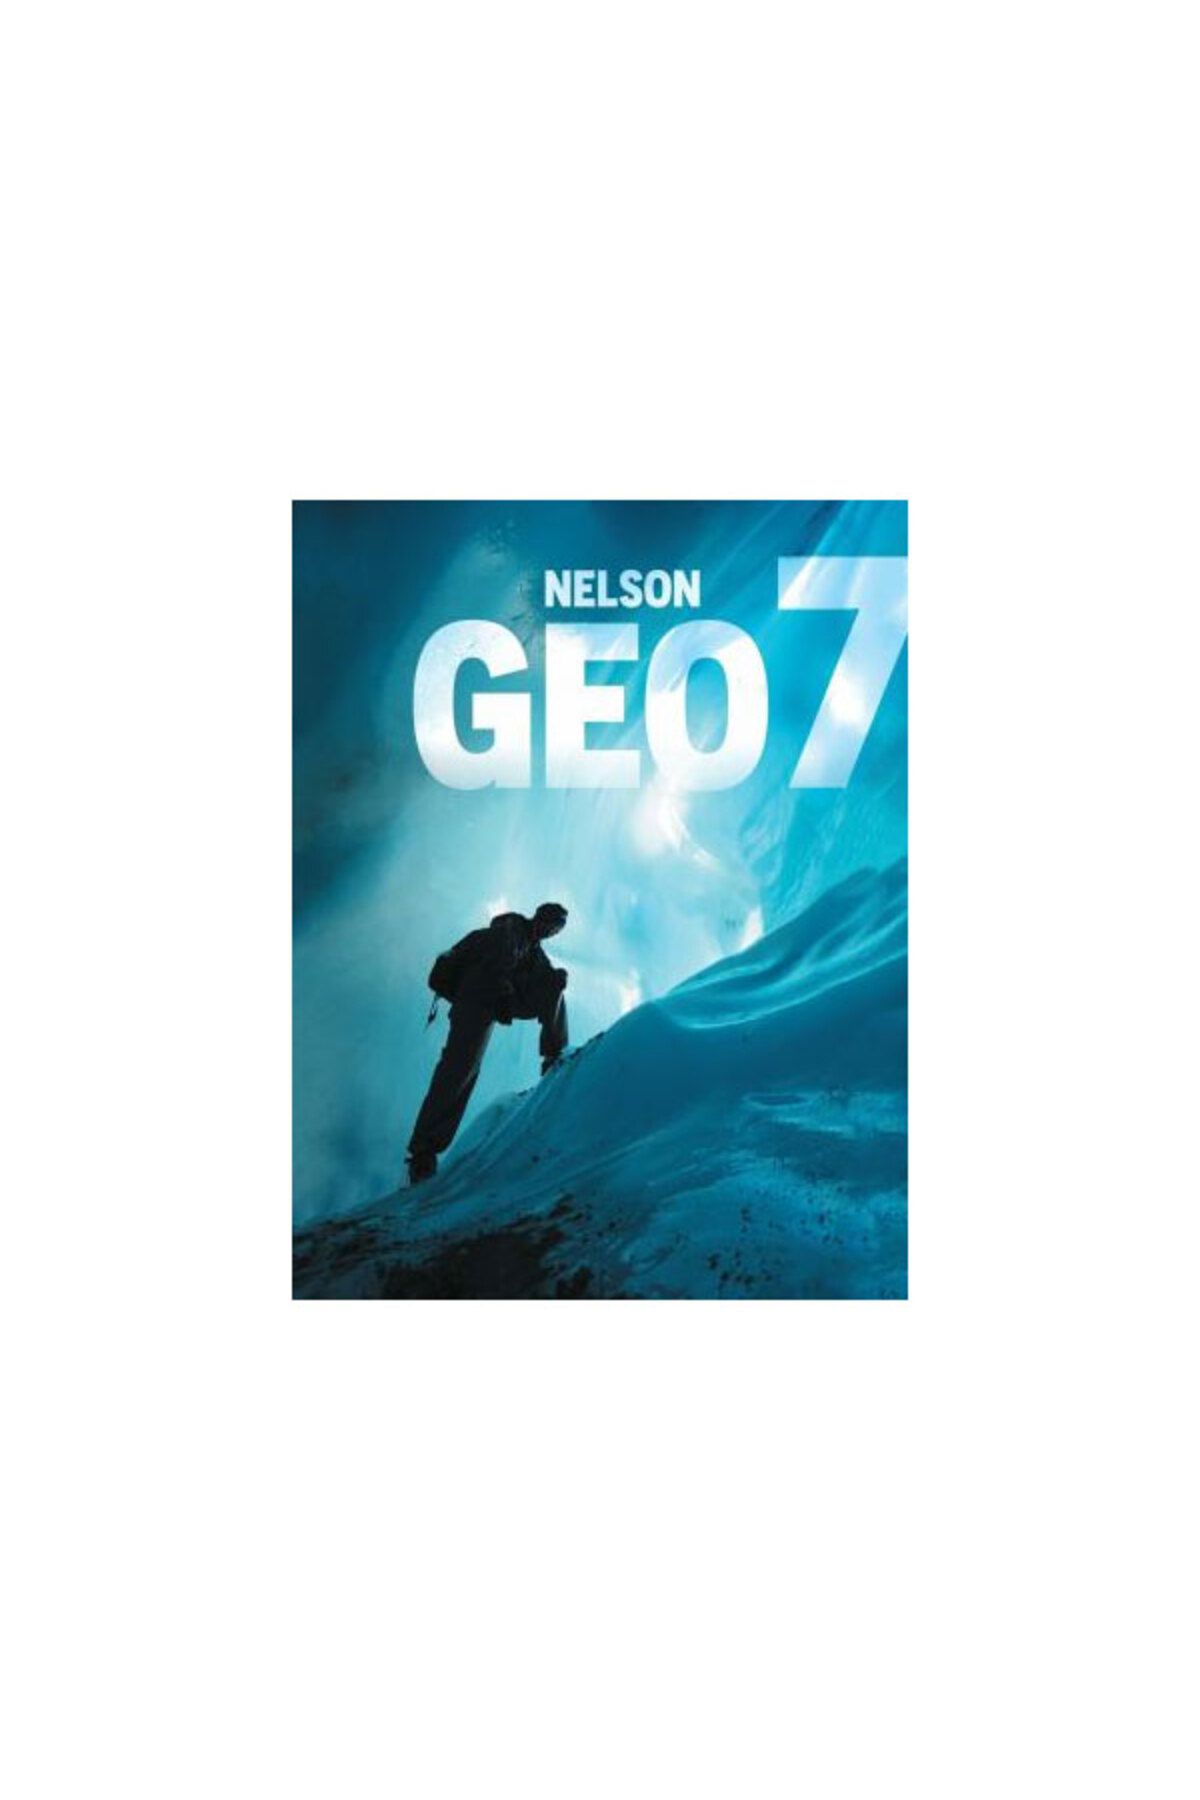 Nelson Geo7 Student Book Book Online Pdf Education